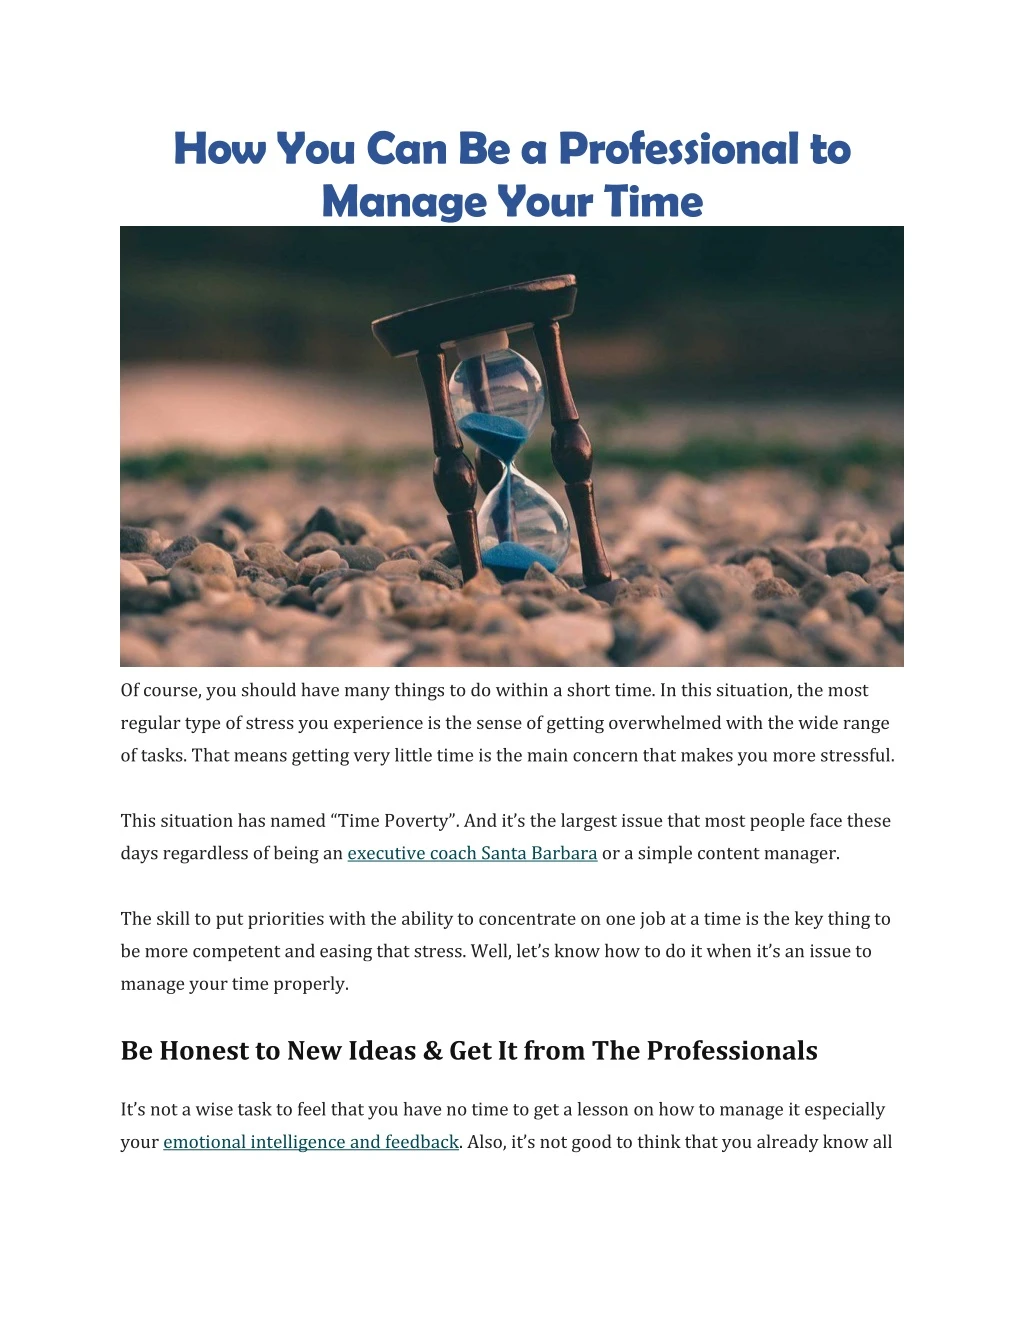 how you can be a professional to manage your time